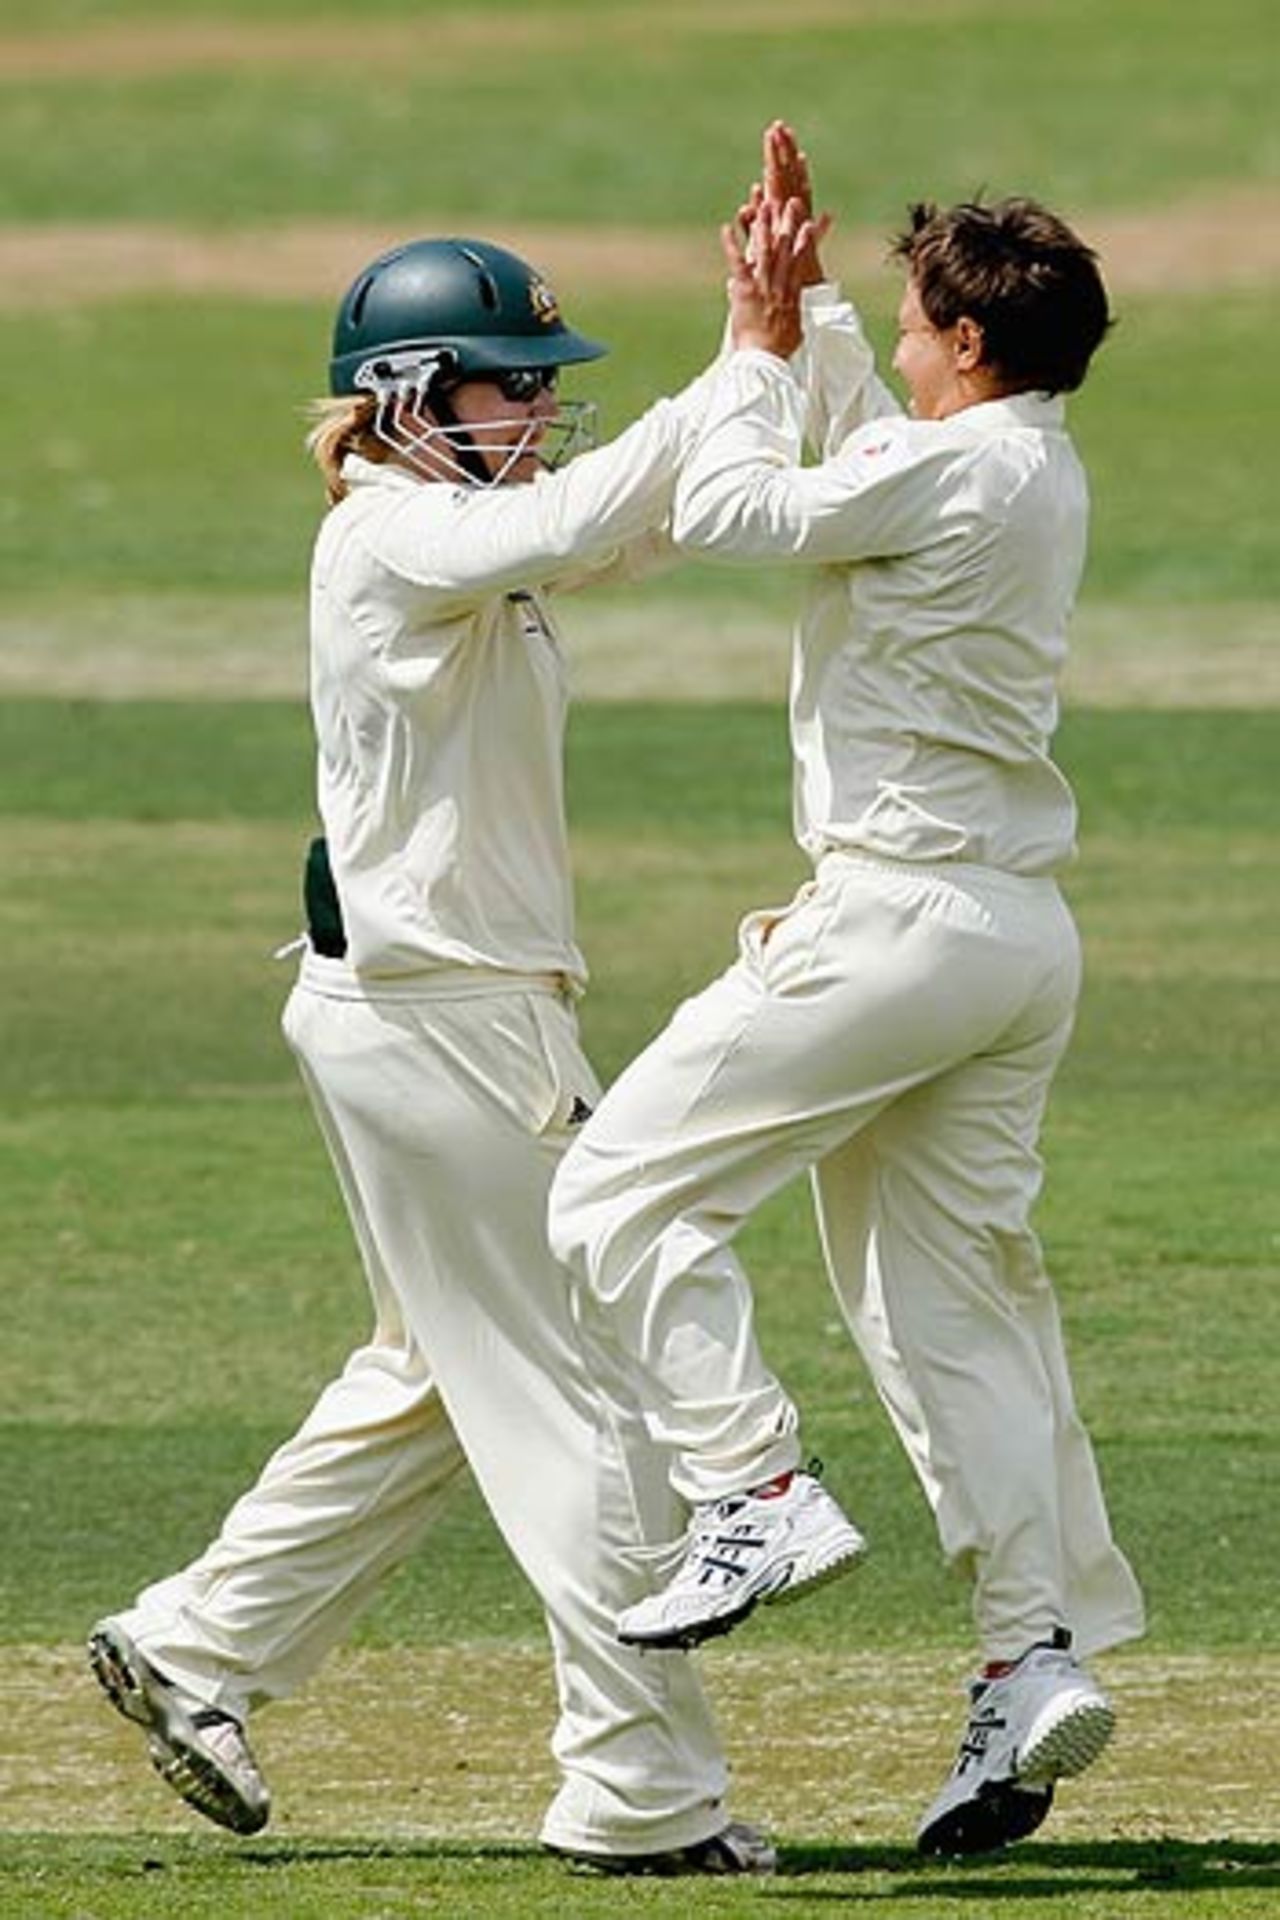 Alex Blackwell and Shelley Nitschke celebrate the fall of an Indian wicket, Australia Women v India Women, Only Test, Adelaide, Feb 19, 2006